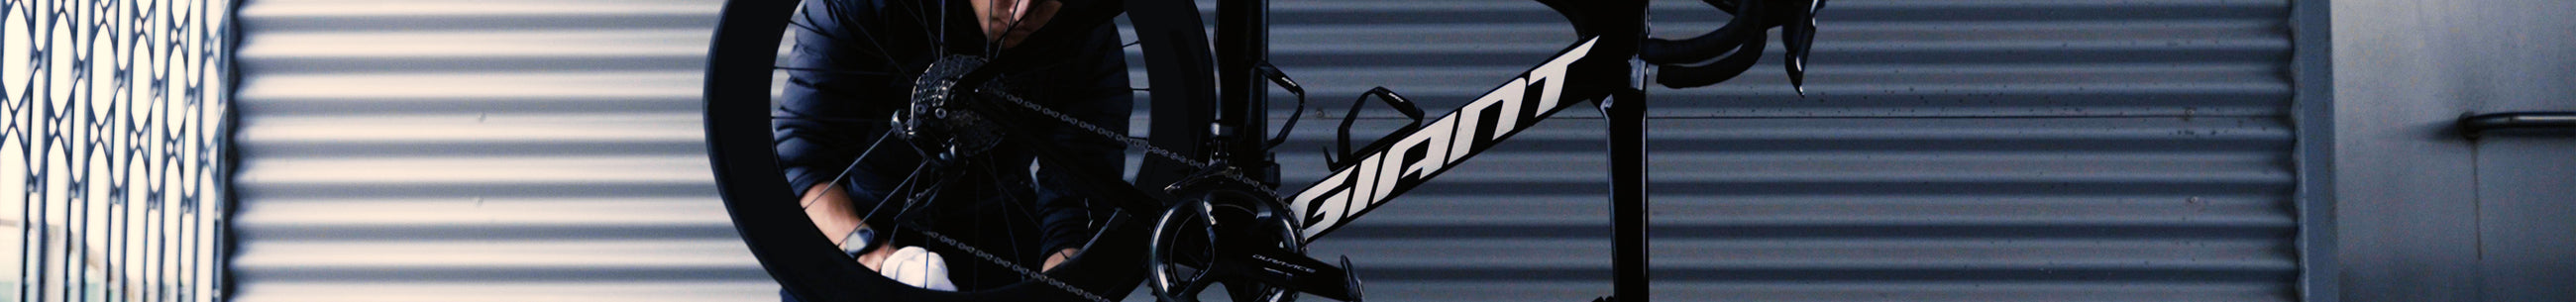 Water Bottle Cages collection image